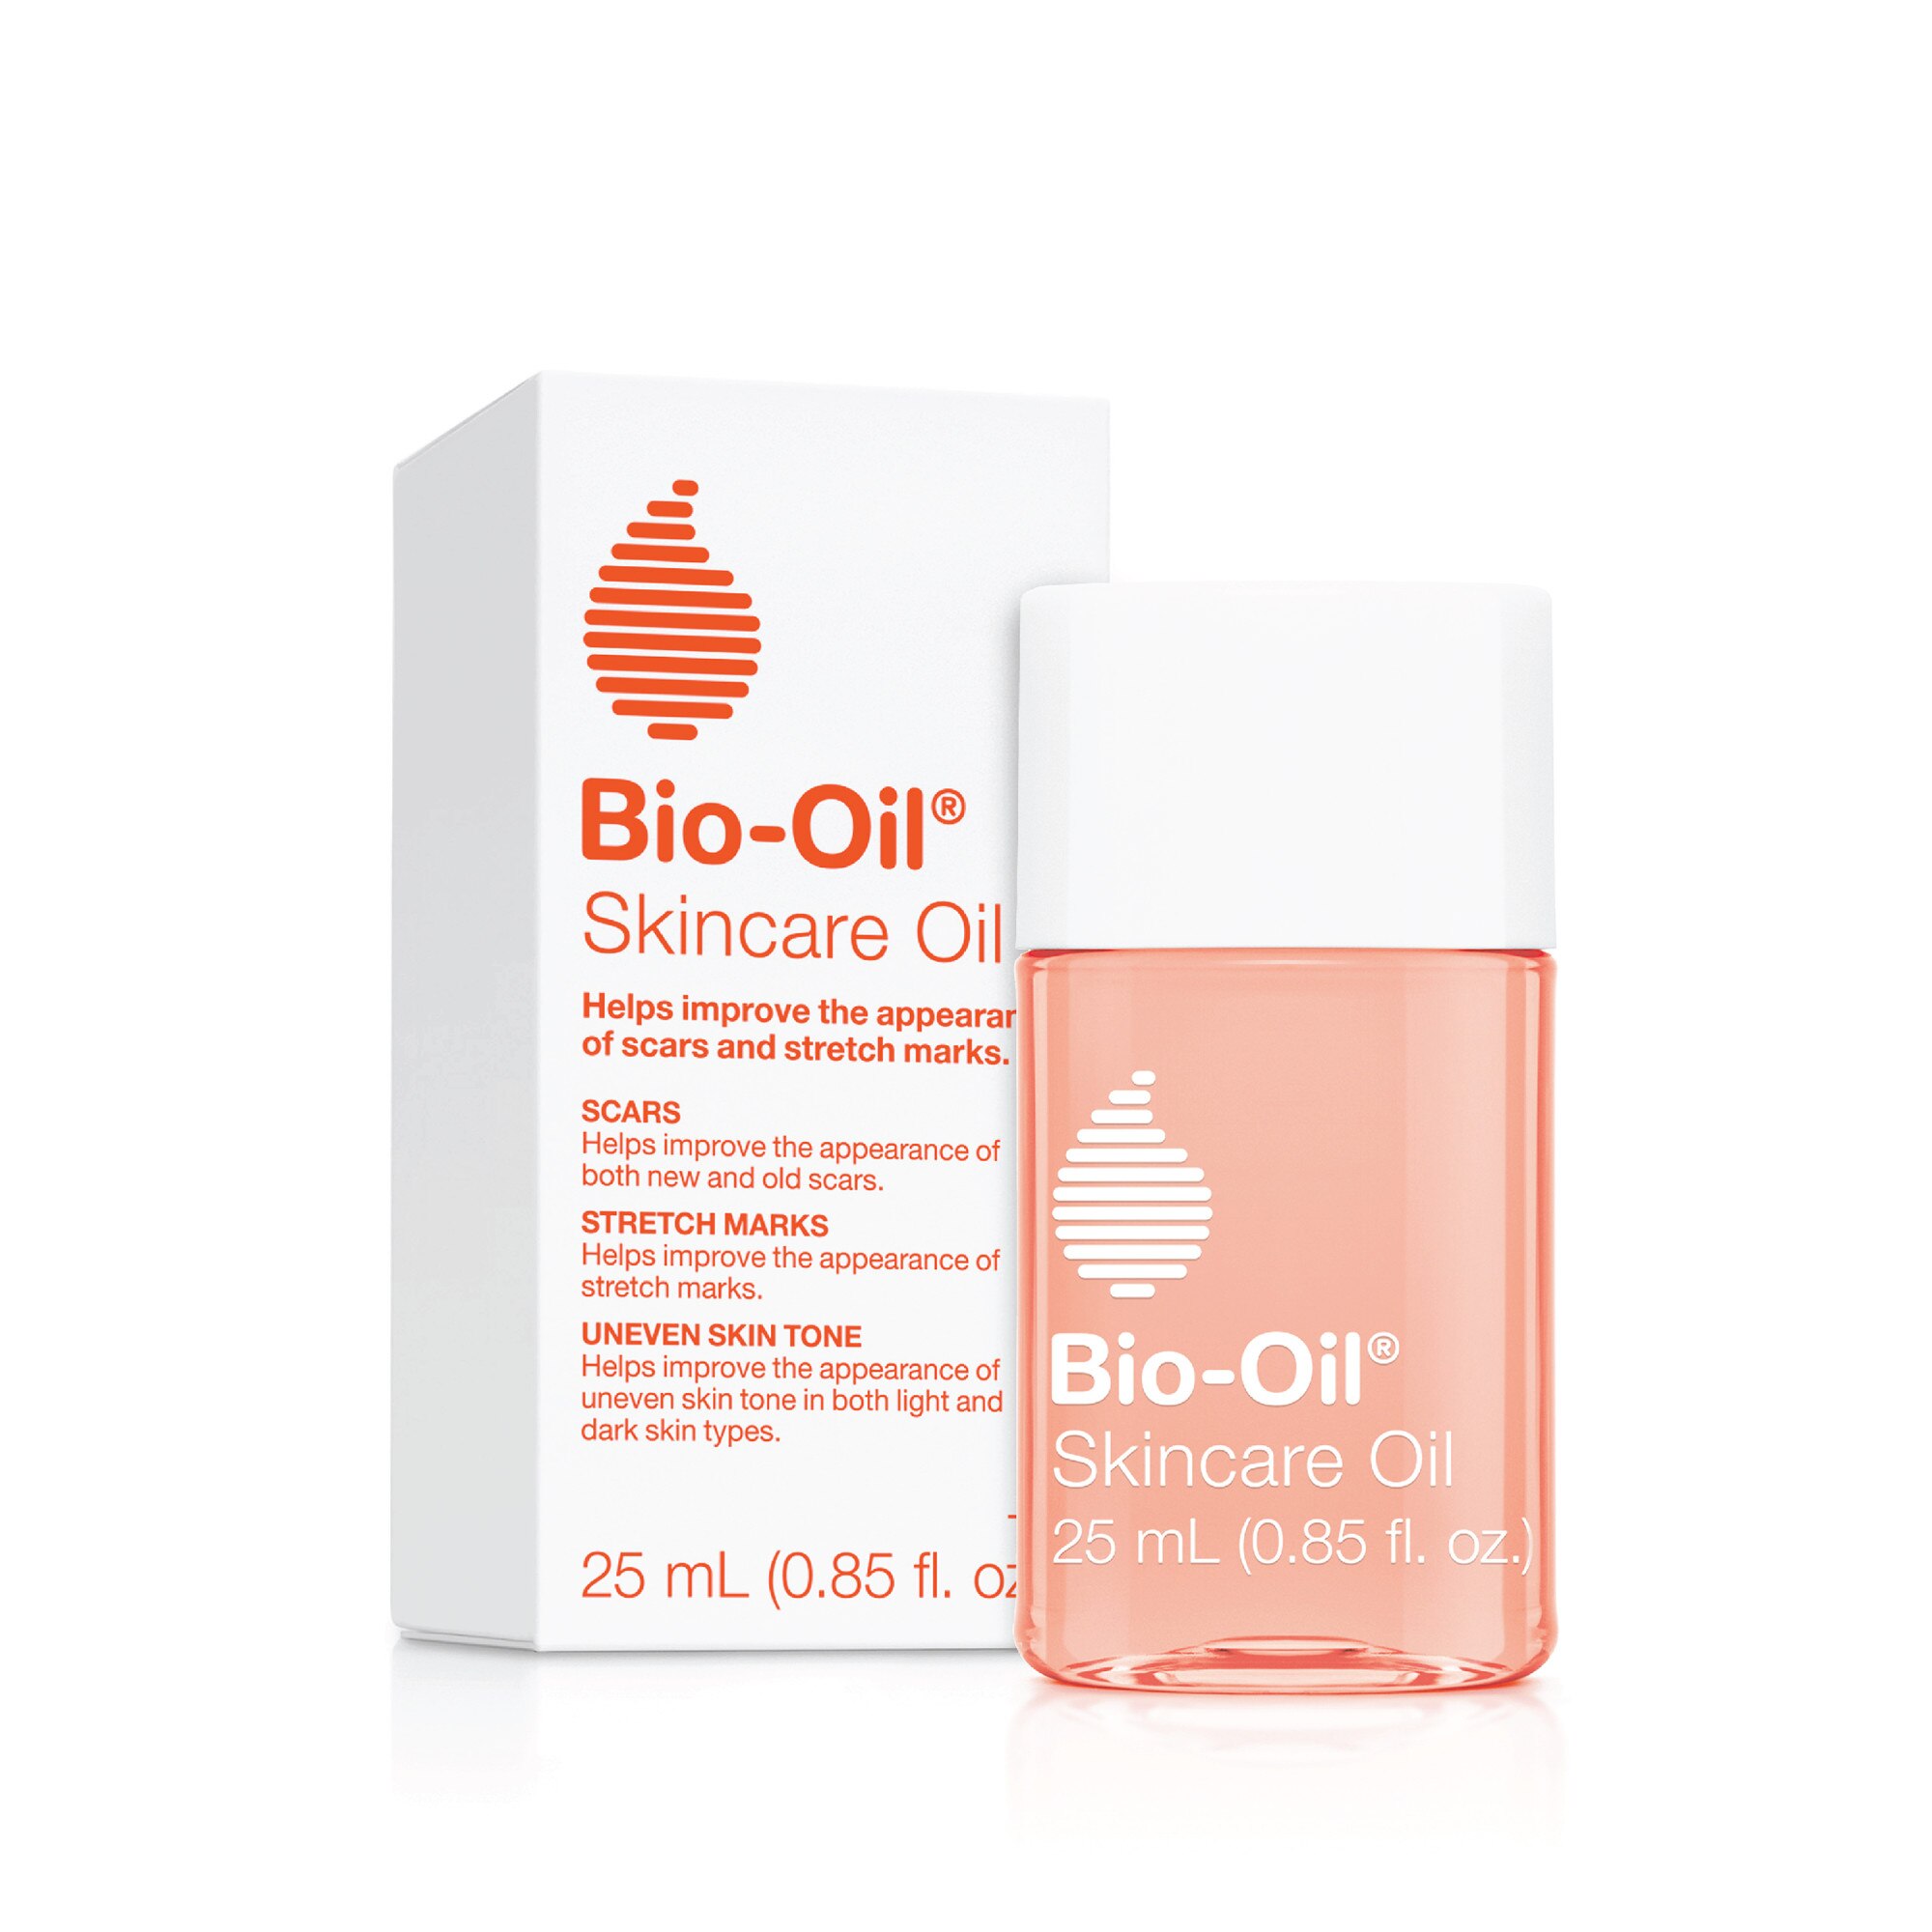 Bio-Oil Trial Size Body Oil for Scars and Stretchmarks, Non-Greasy, 0.85 OZ